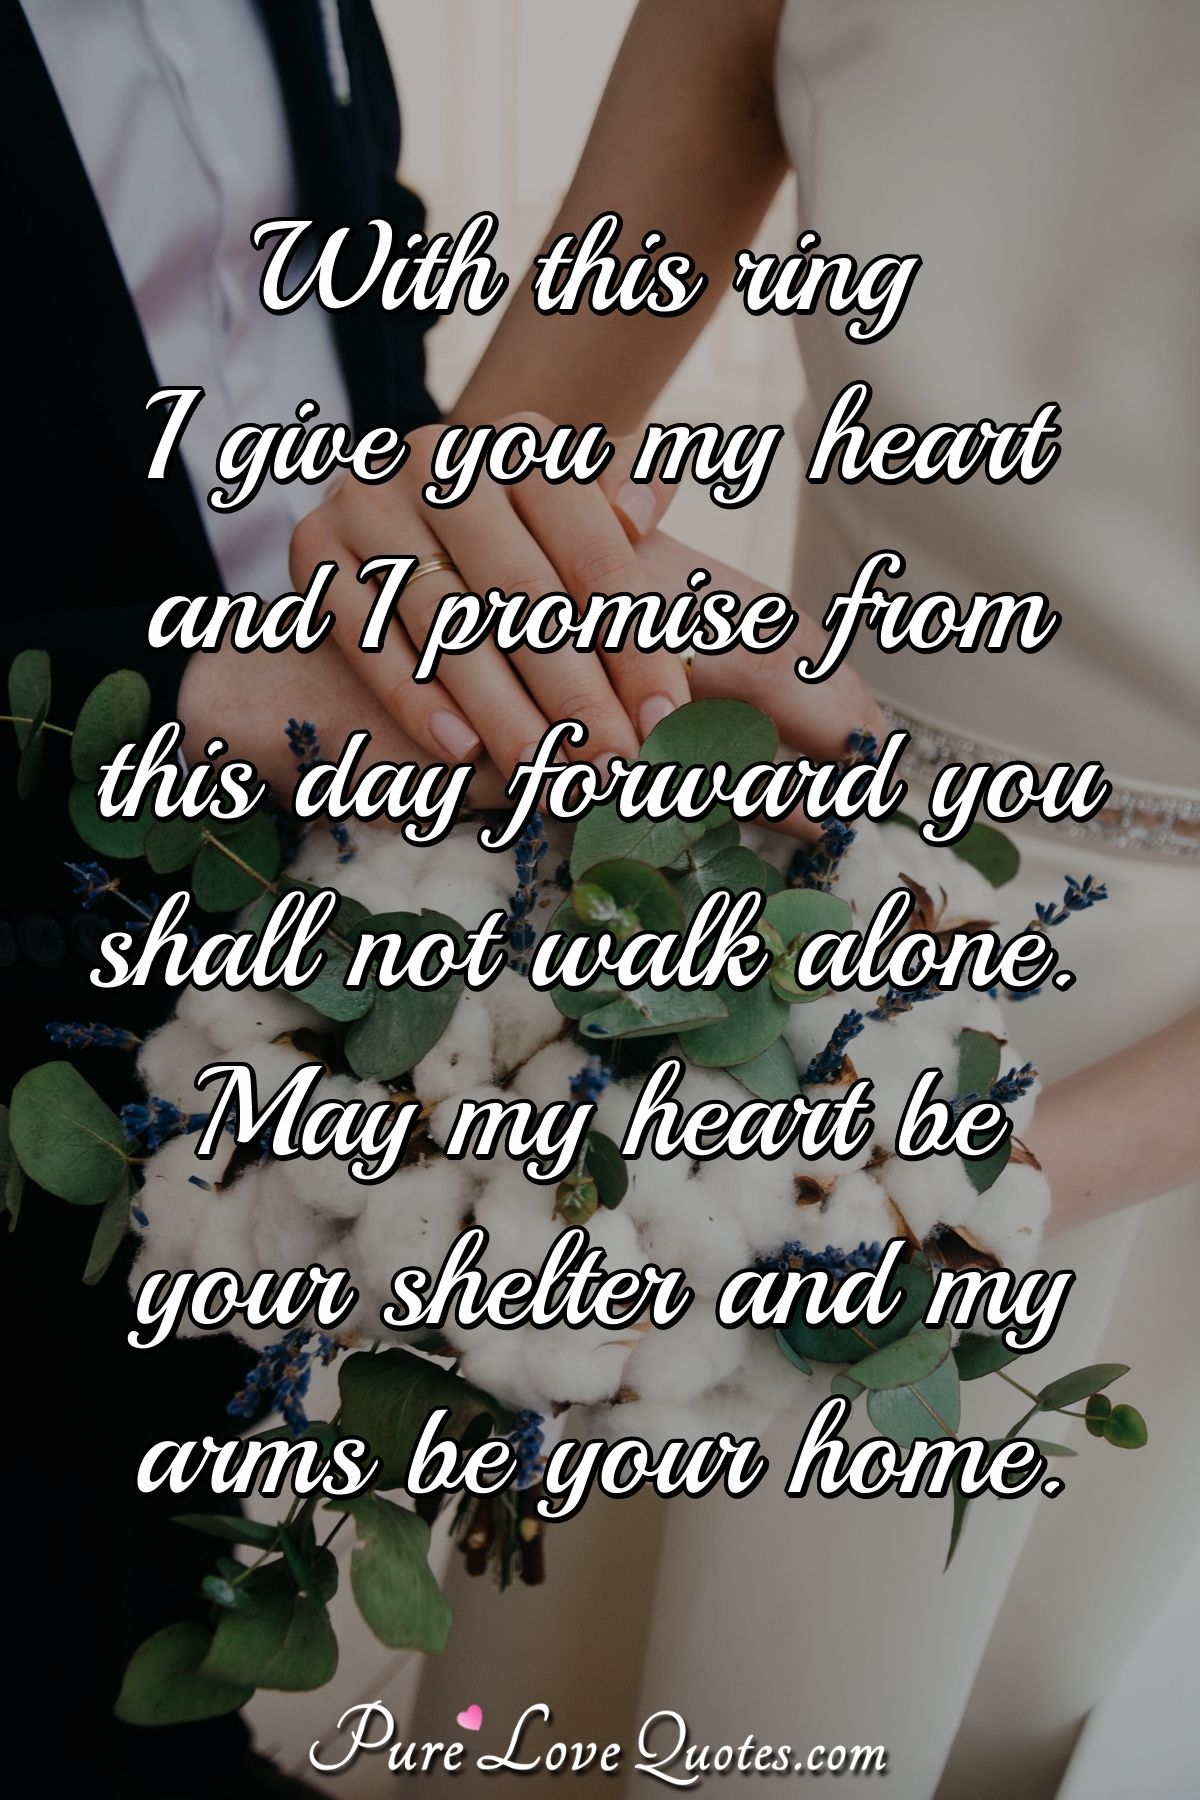 With this ring I give you my heart and I promise from this day forward you shall not walk alone. May my heart be your shelter and my arms be your home. - Anonymous